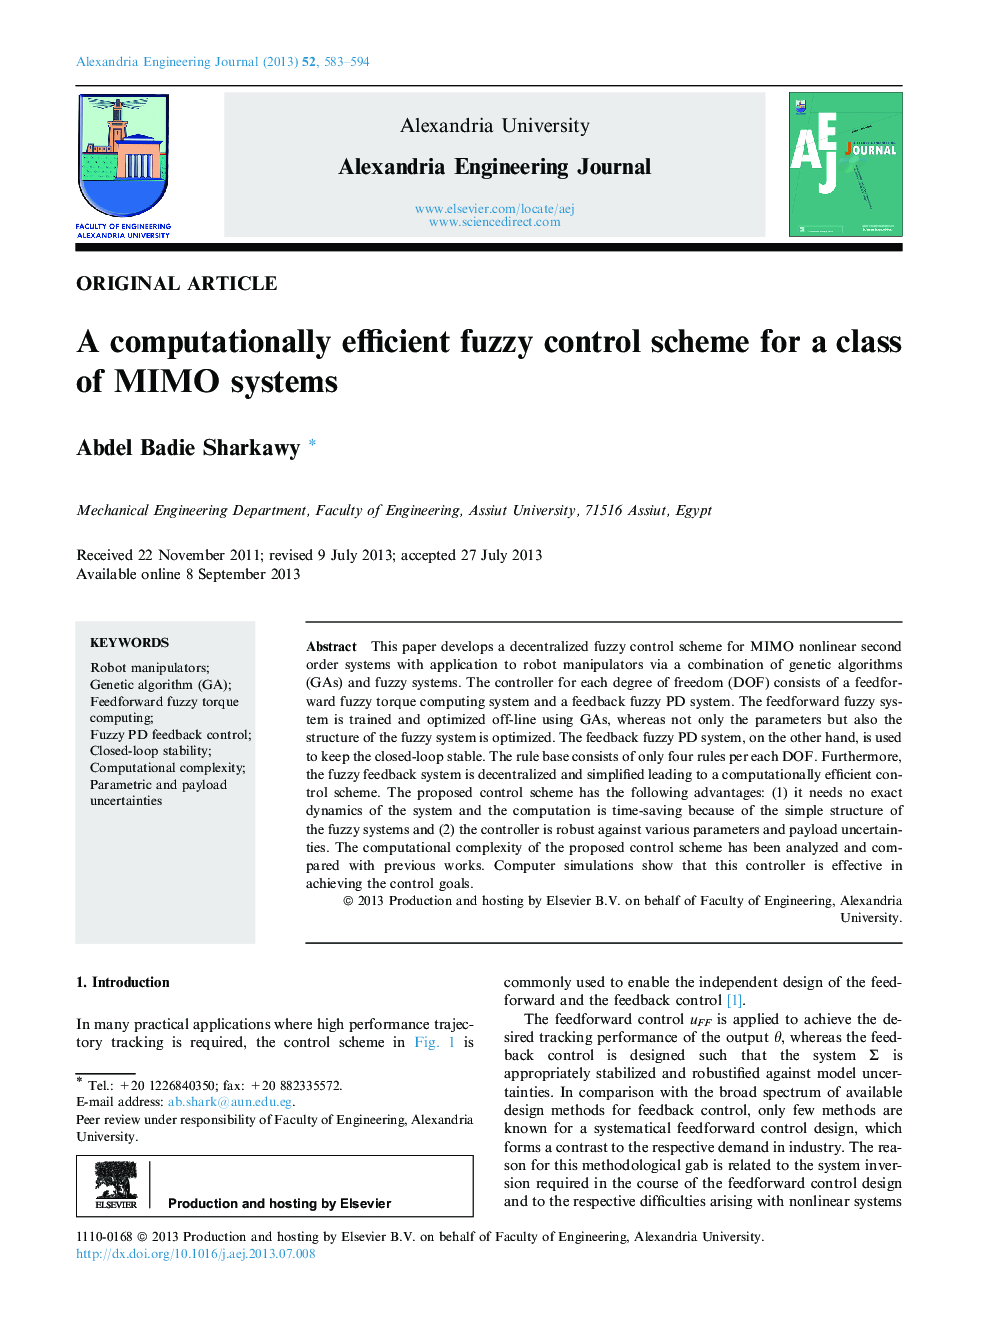 A computationally efficient fuzzy control scheme for a class of MIMO systems